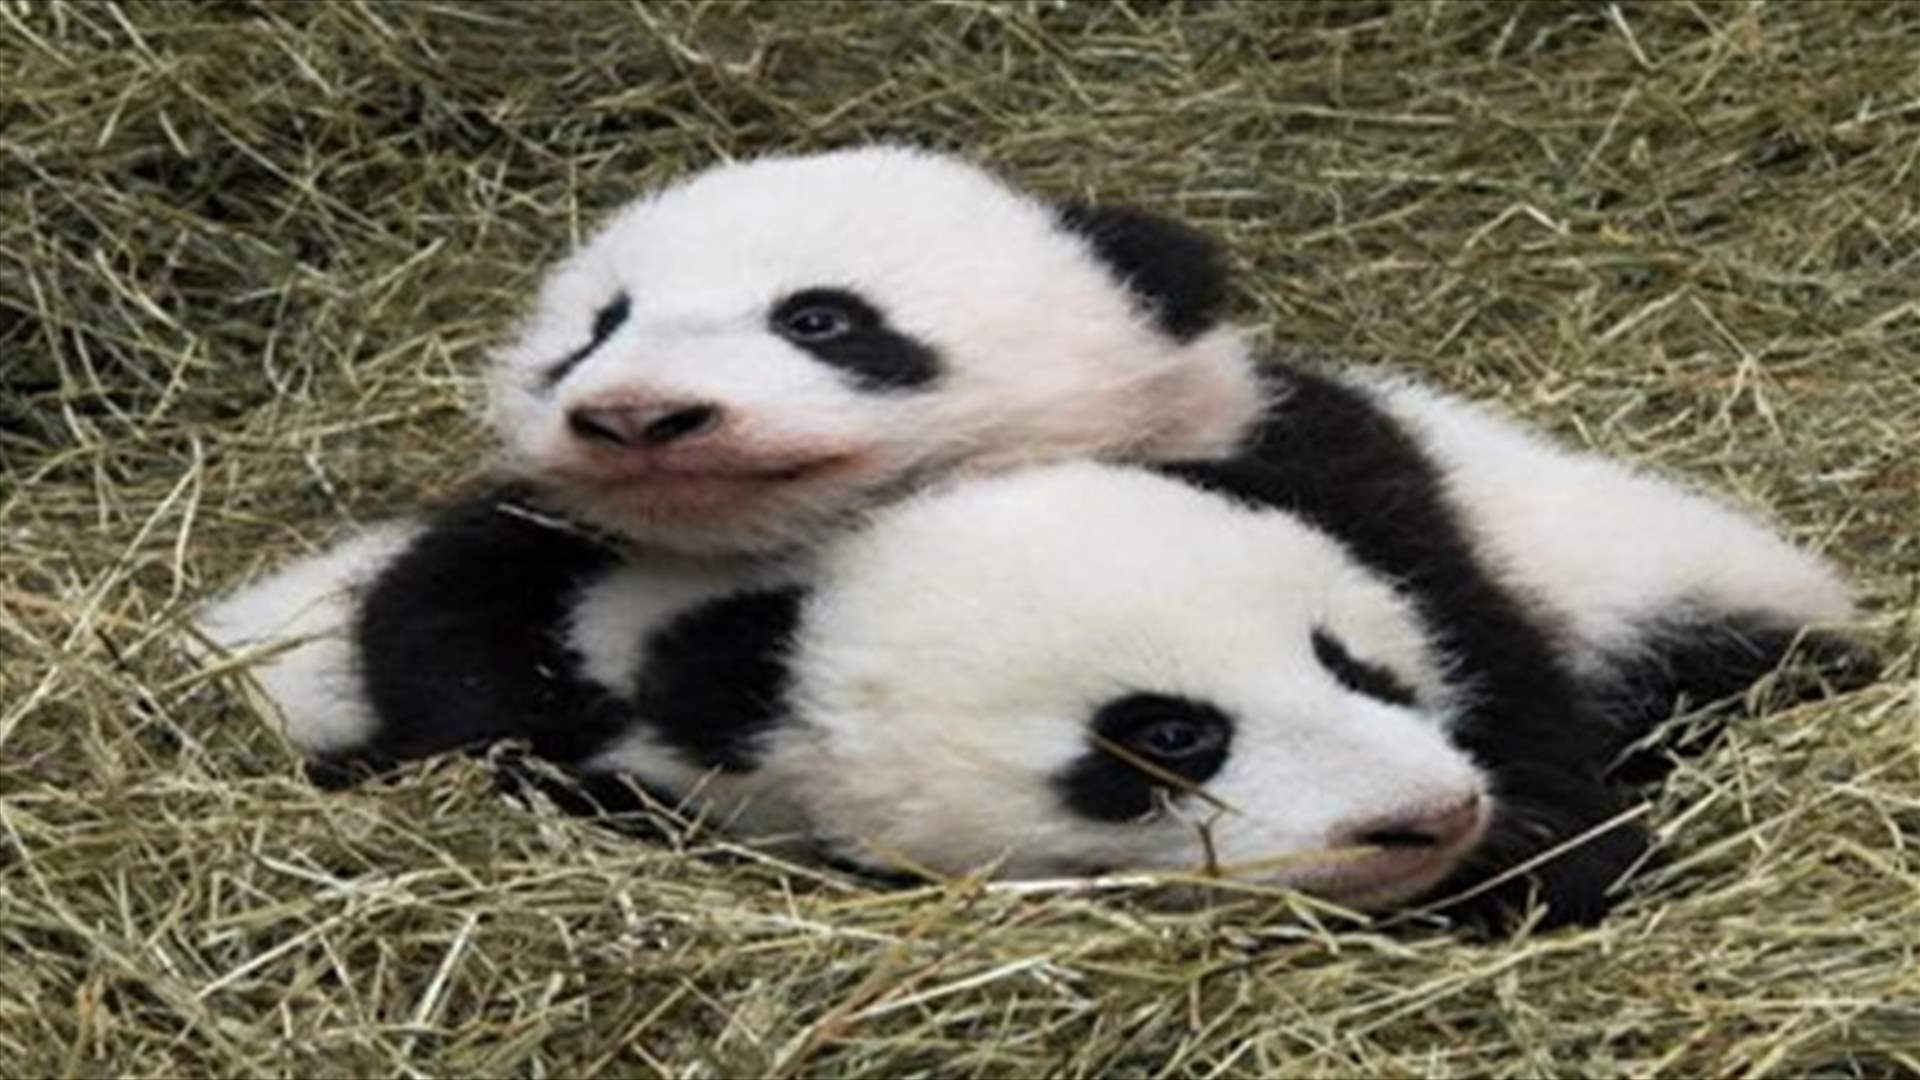 Vienna Zoo Says Twin Panda Cubs Venture Out Of Cave, Growing Healthily